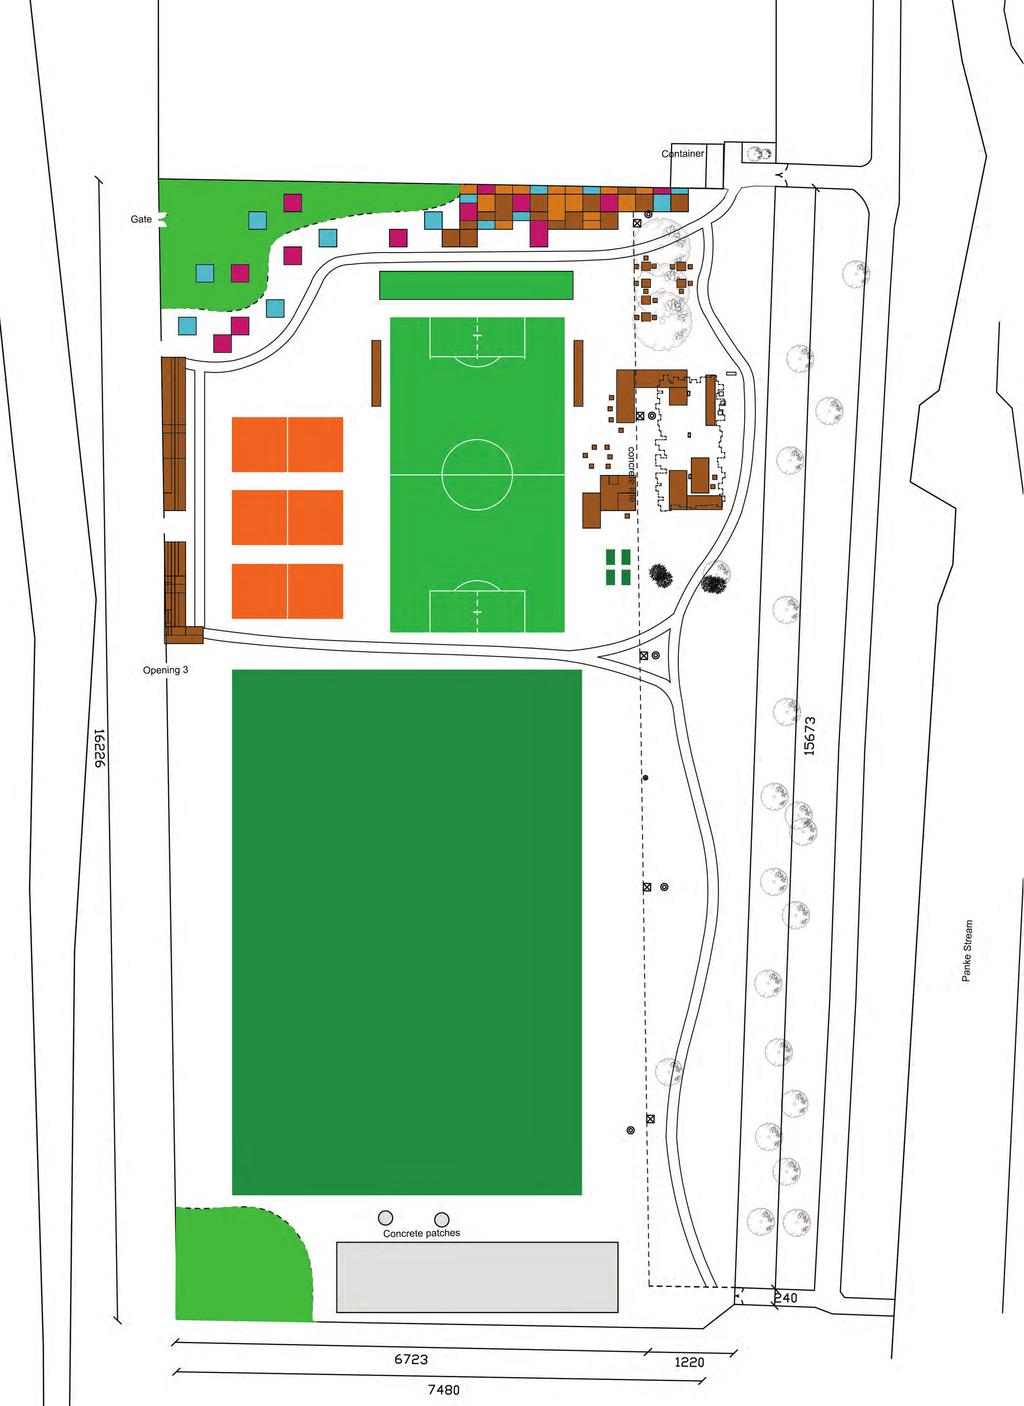 Site Plan 5 m 15 m 25 m SCALE 1:500 TIERED SEATING VEGETATION VOLLEYBALL COURTS FITNESS AREA STEPPING STONE PLATFORMS FULL SIZE FOOTBALL PITCH (50x75m) FUNCTIONAL BUILDING (CHANGING ROOMS ETC) SPORTS